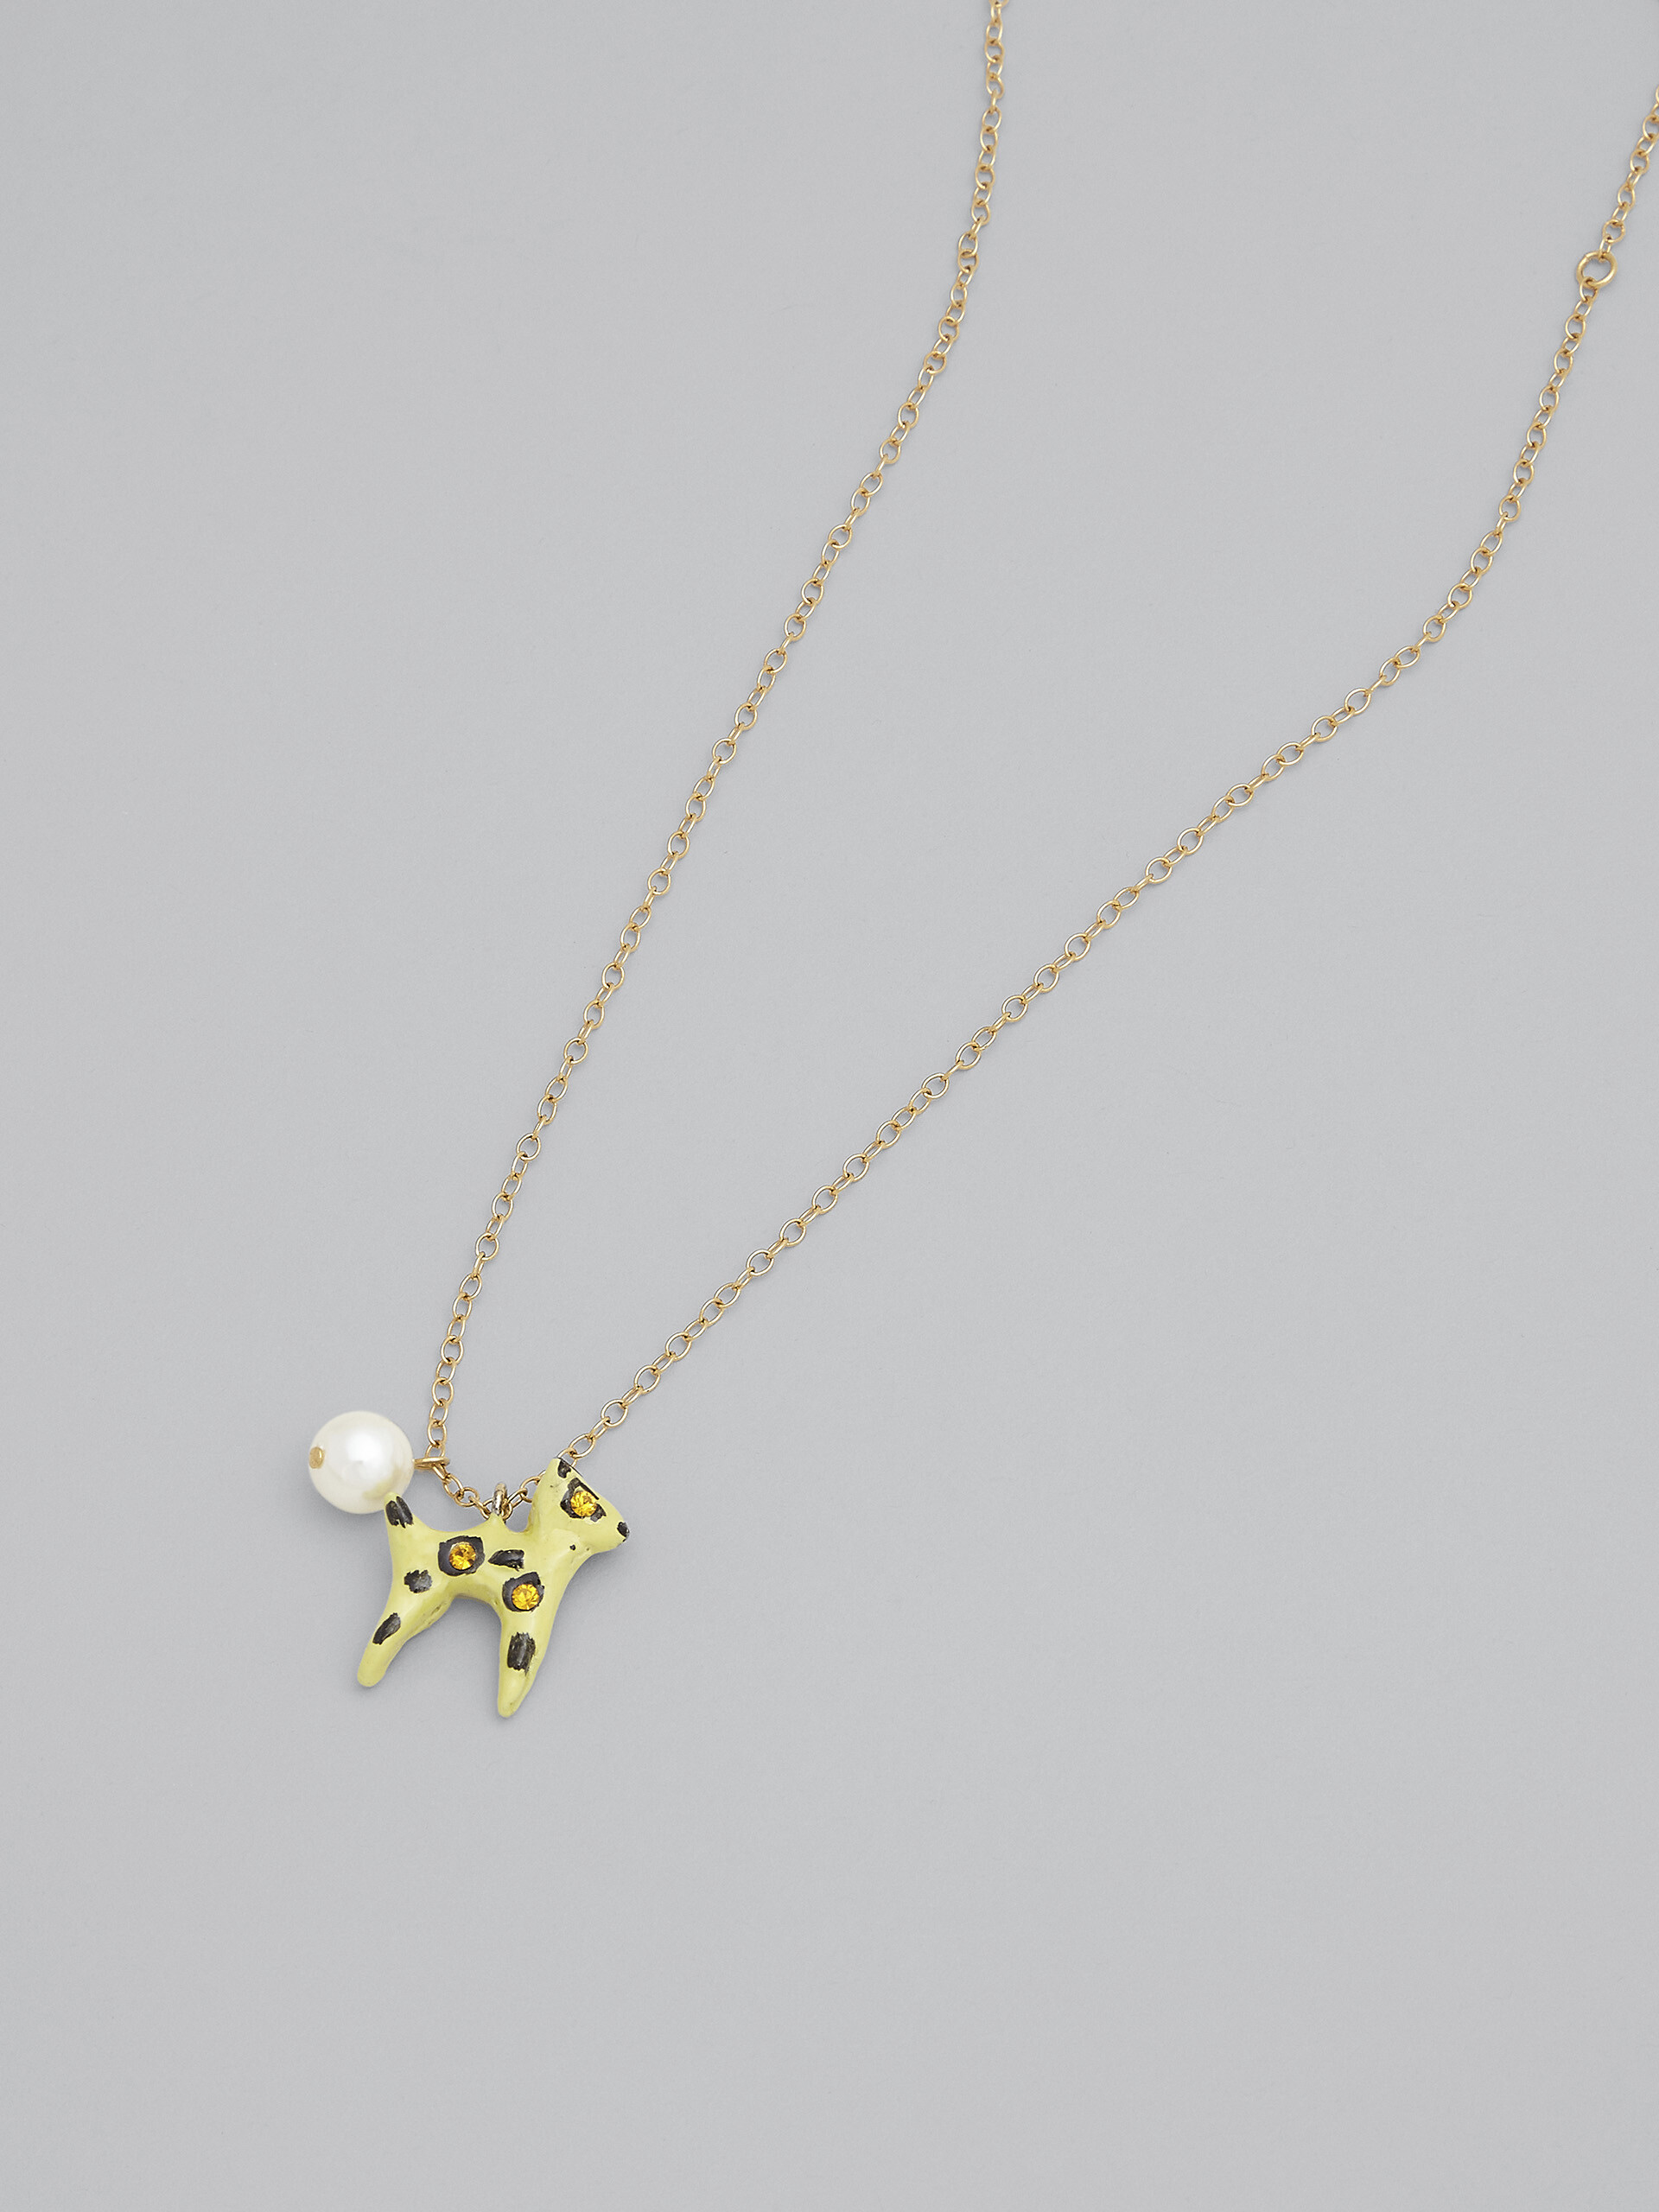 PLAYFUL 옐로우 네크리스 - Necklaces - Image 3